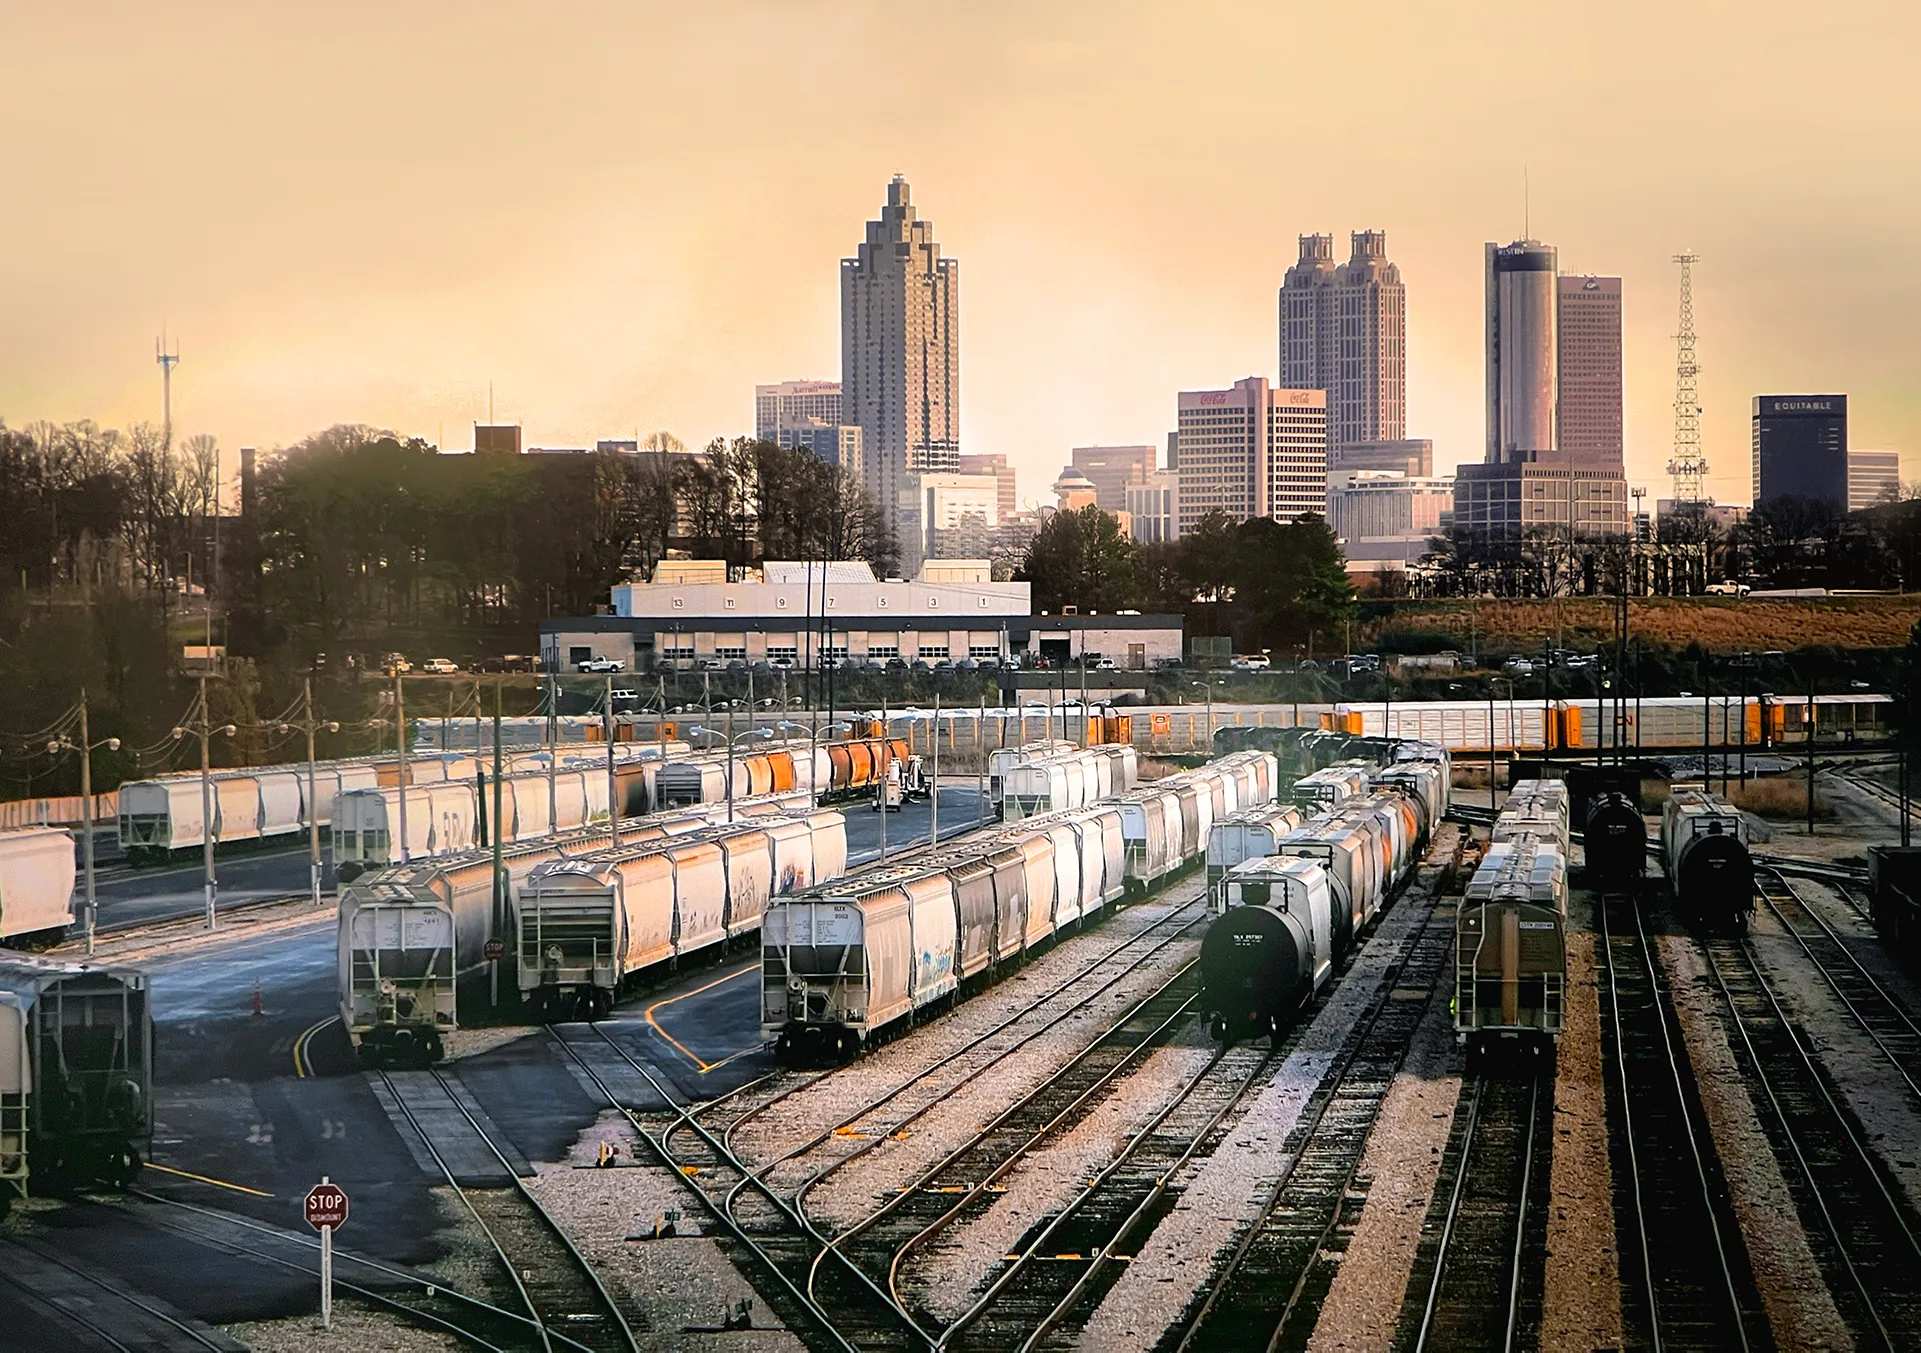 Trainyard with skyline in the background